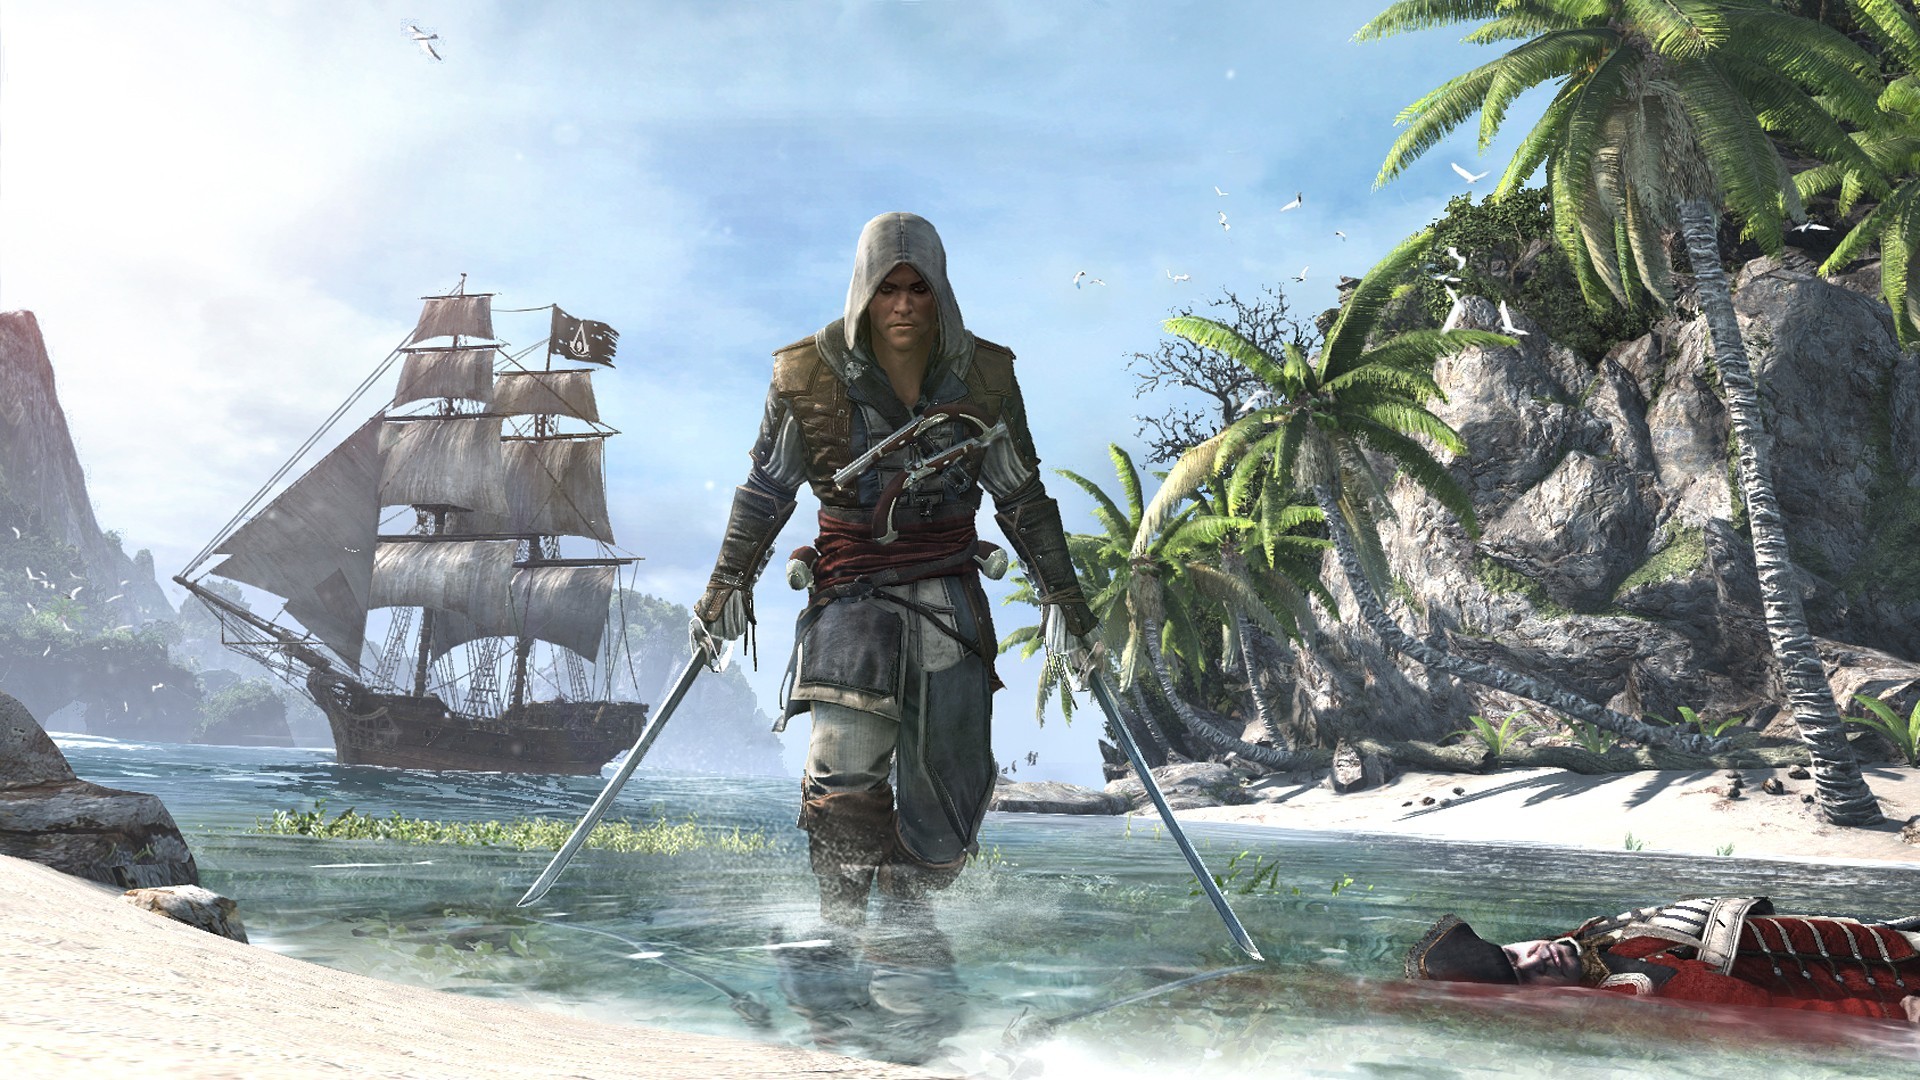 Buy Assassin's Creed Triple Pack: Black Flag, Unity, Syndicate (Xbox) cheap  from 1 USD